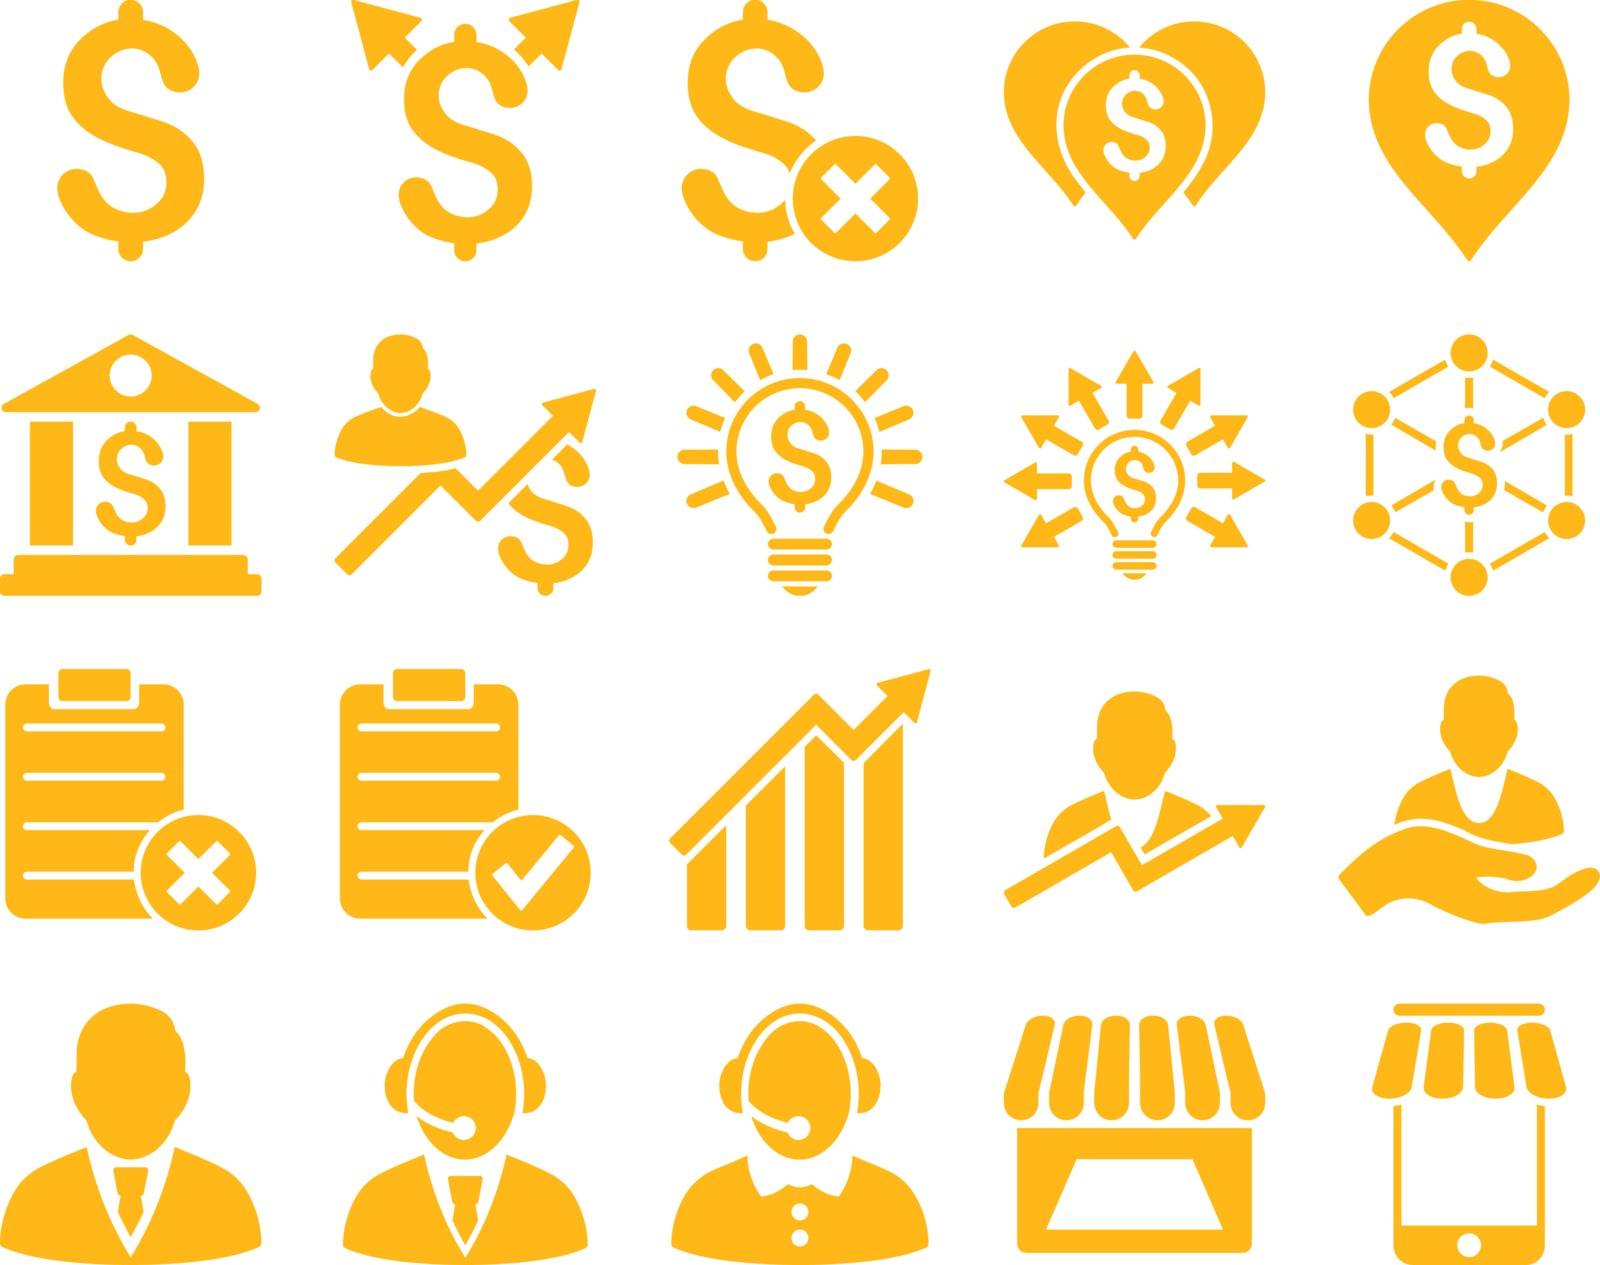 Trade business and bank service icon set. These flat icons use %icon_colors%. Images are isolated on a white background. Angles are rounded.